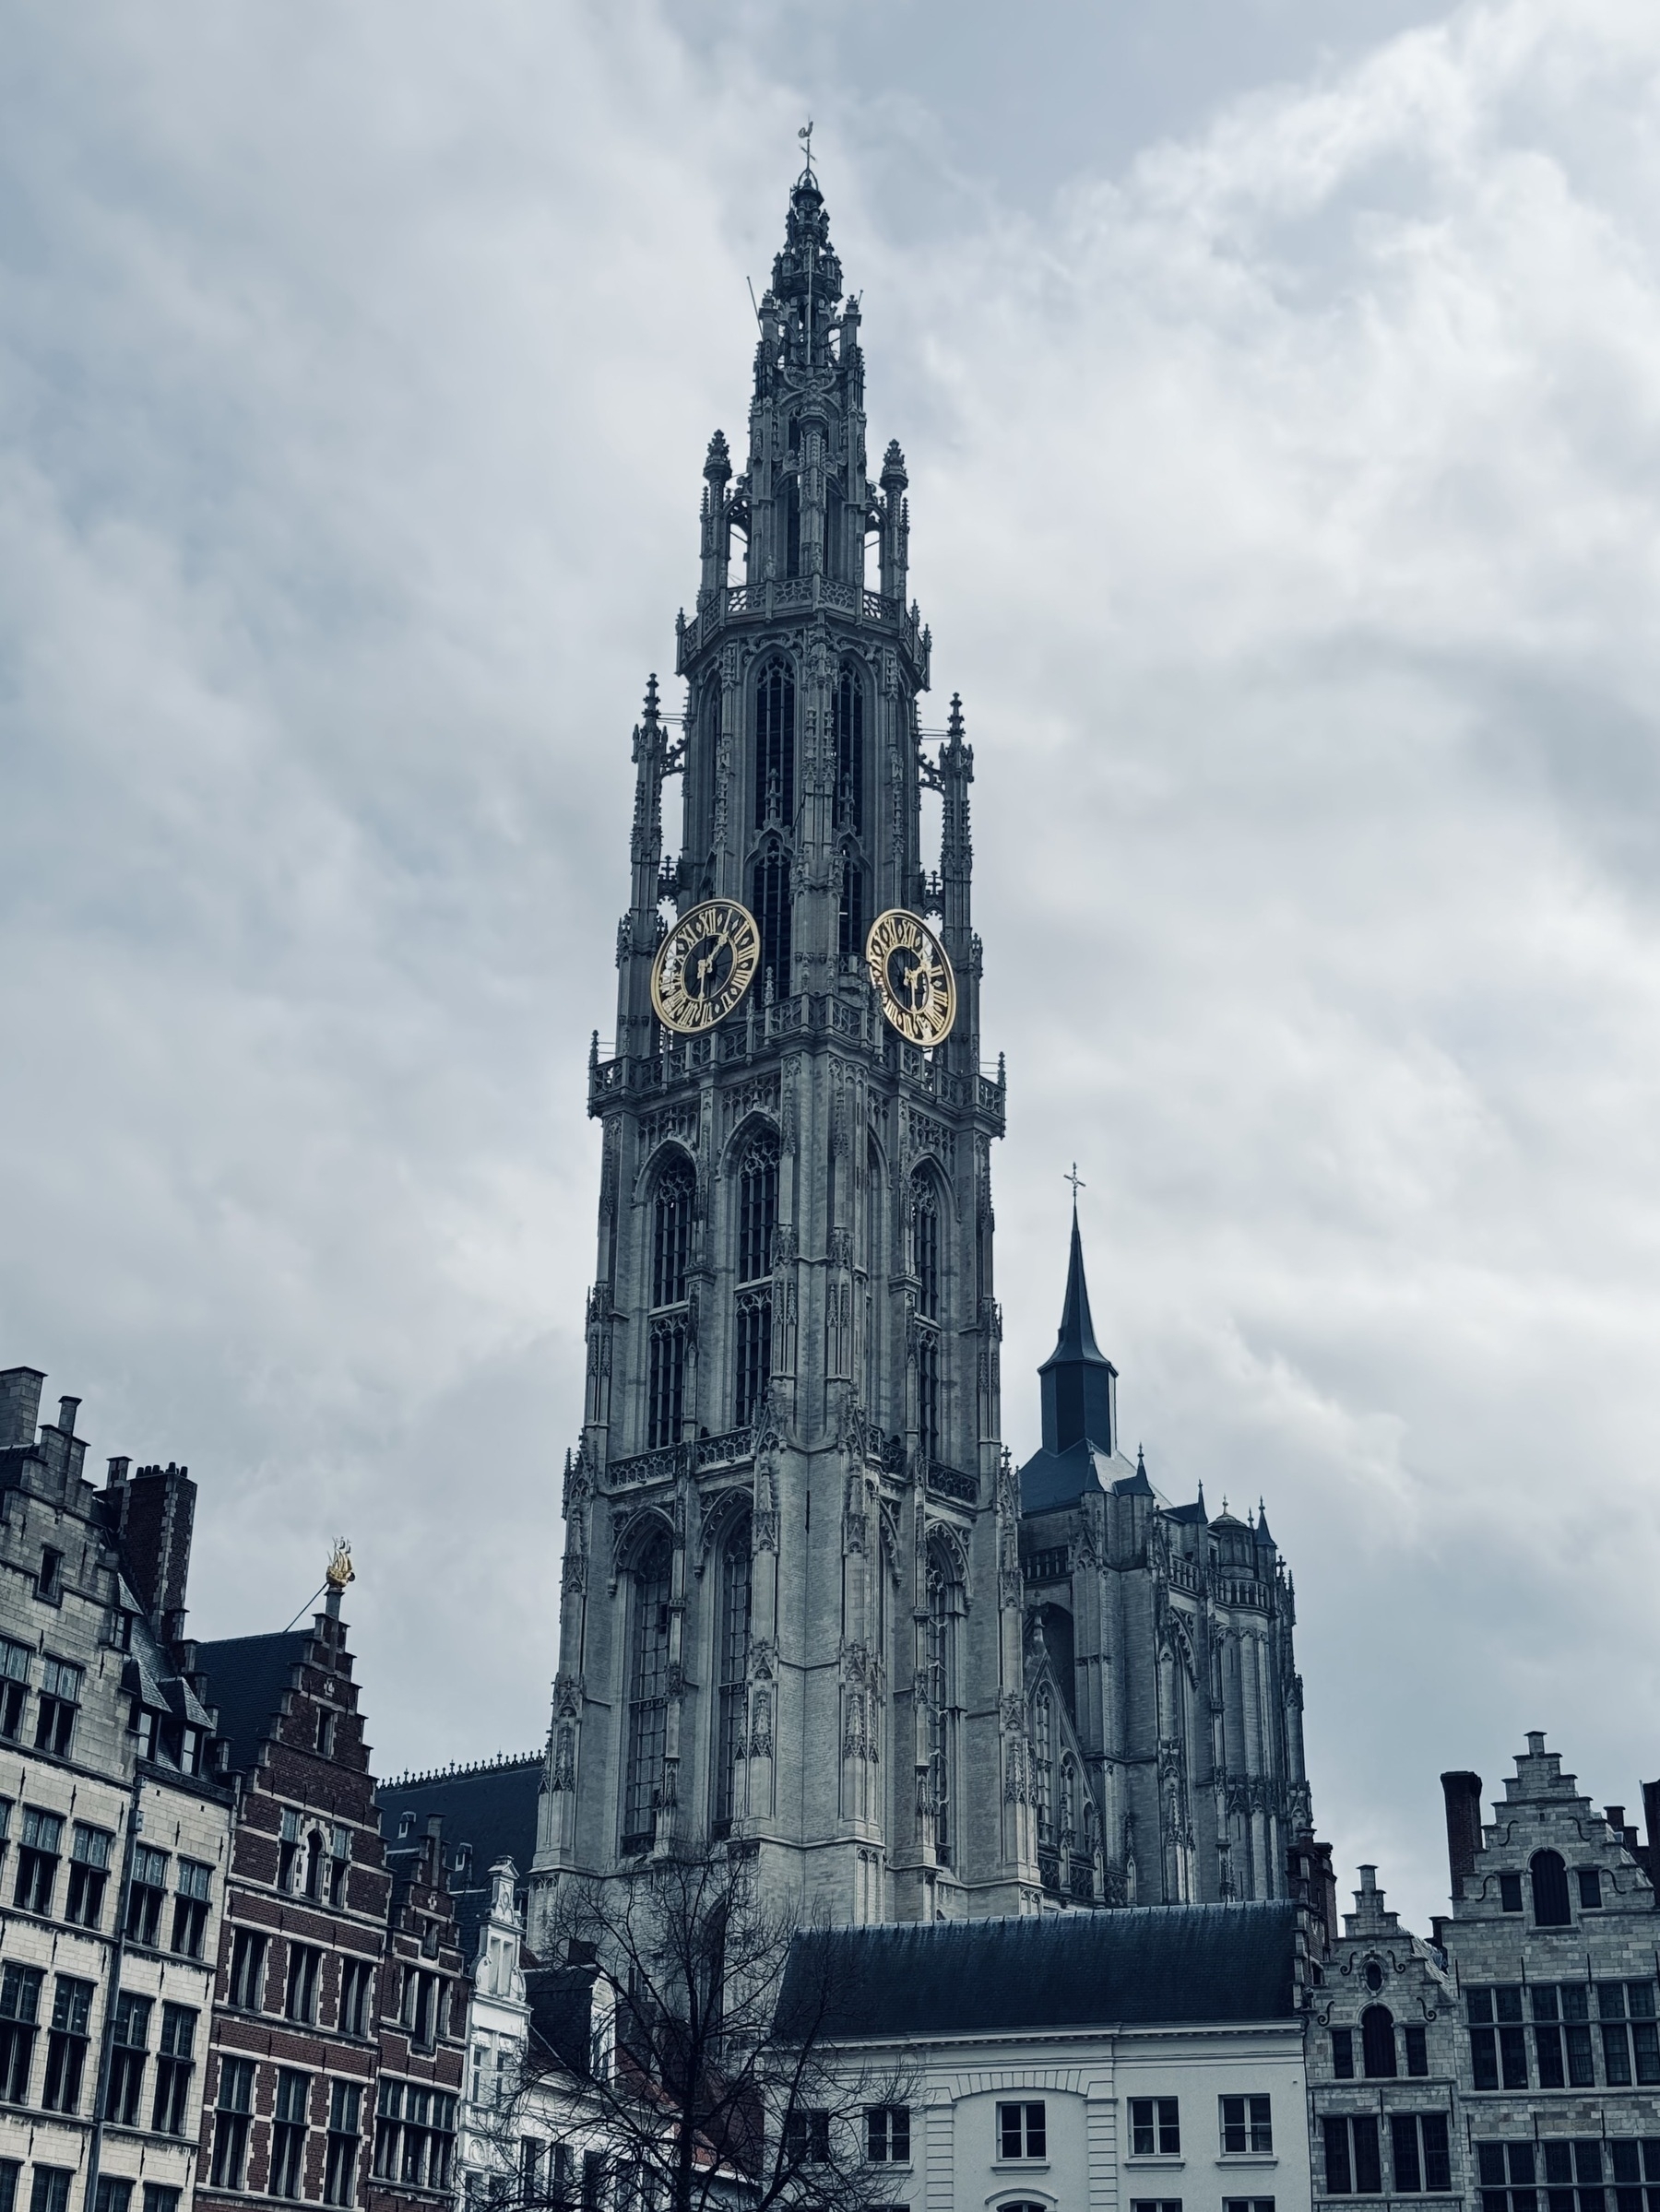 The gothic tower of Antwerp cathedral towering over the surrounding buildings.